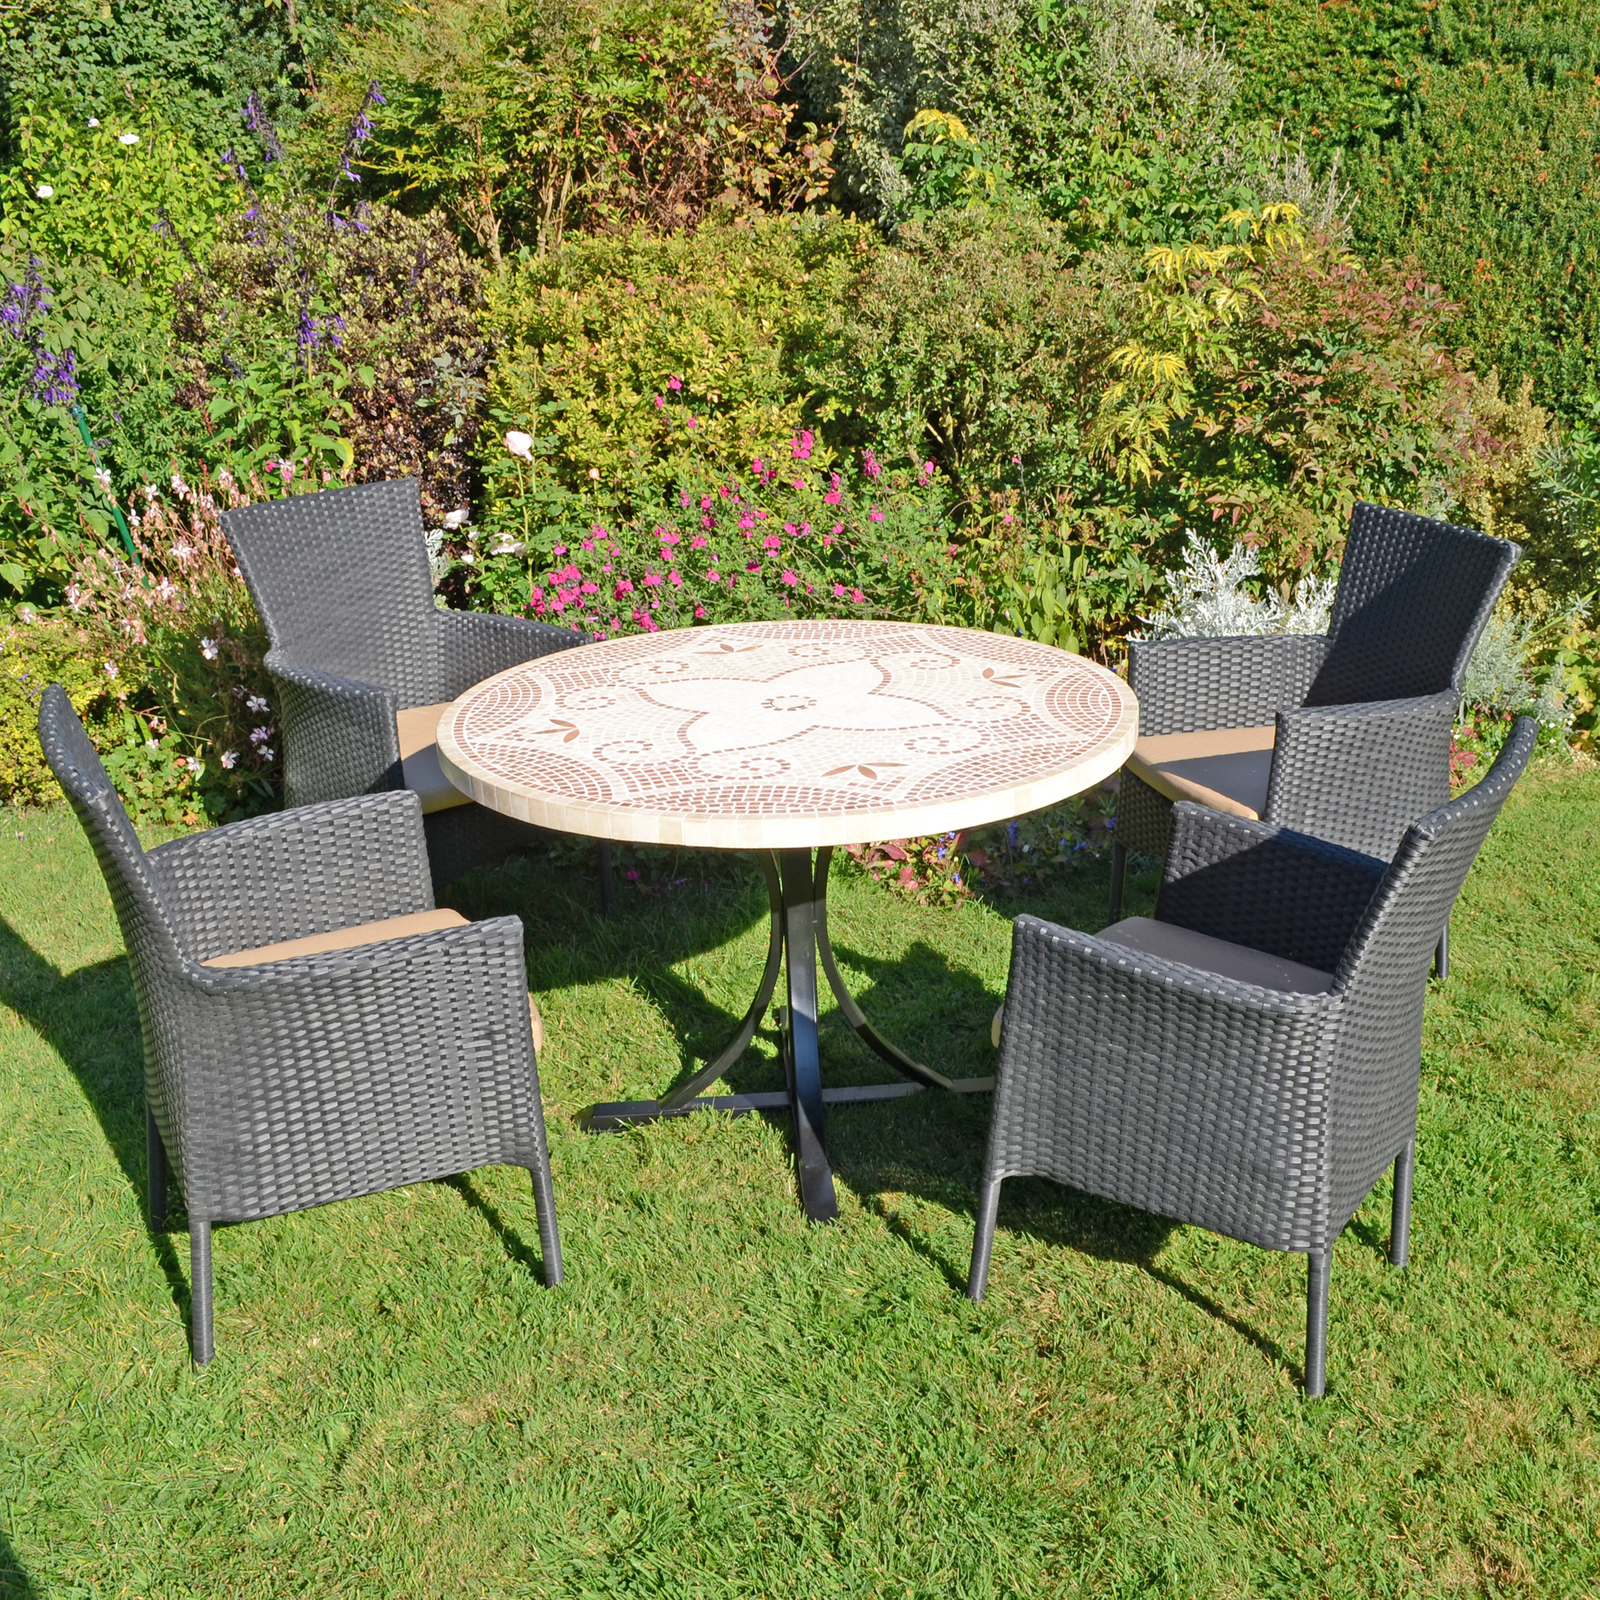 Byron Manor Provence Mosaic Stone Garden Dining Table With 4 Stockholm Black Wicker Chairs Dining Sets Byron Manor   